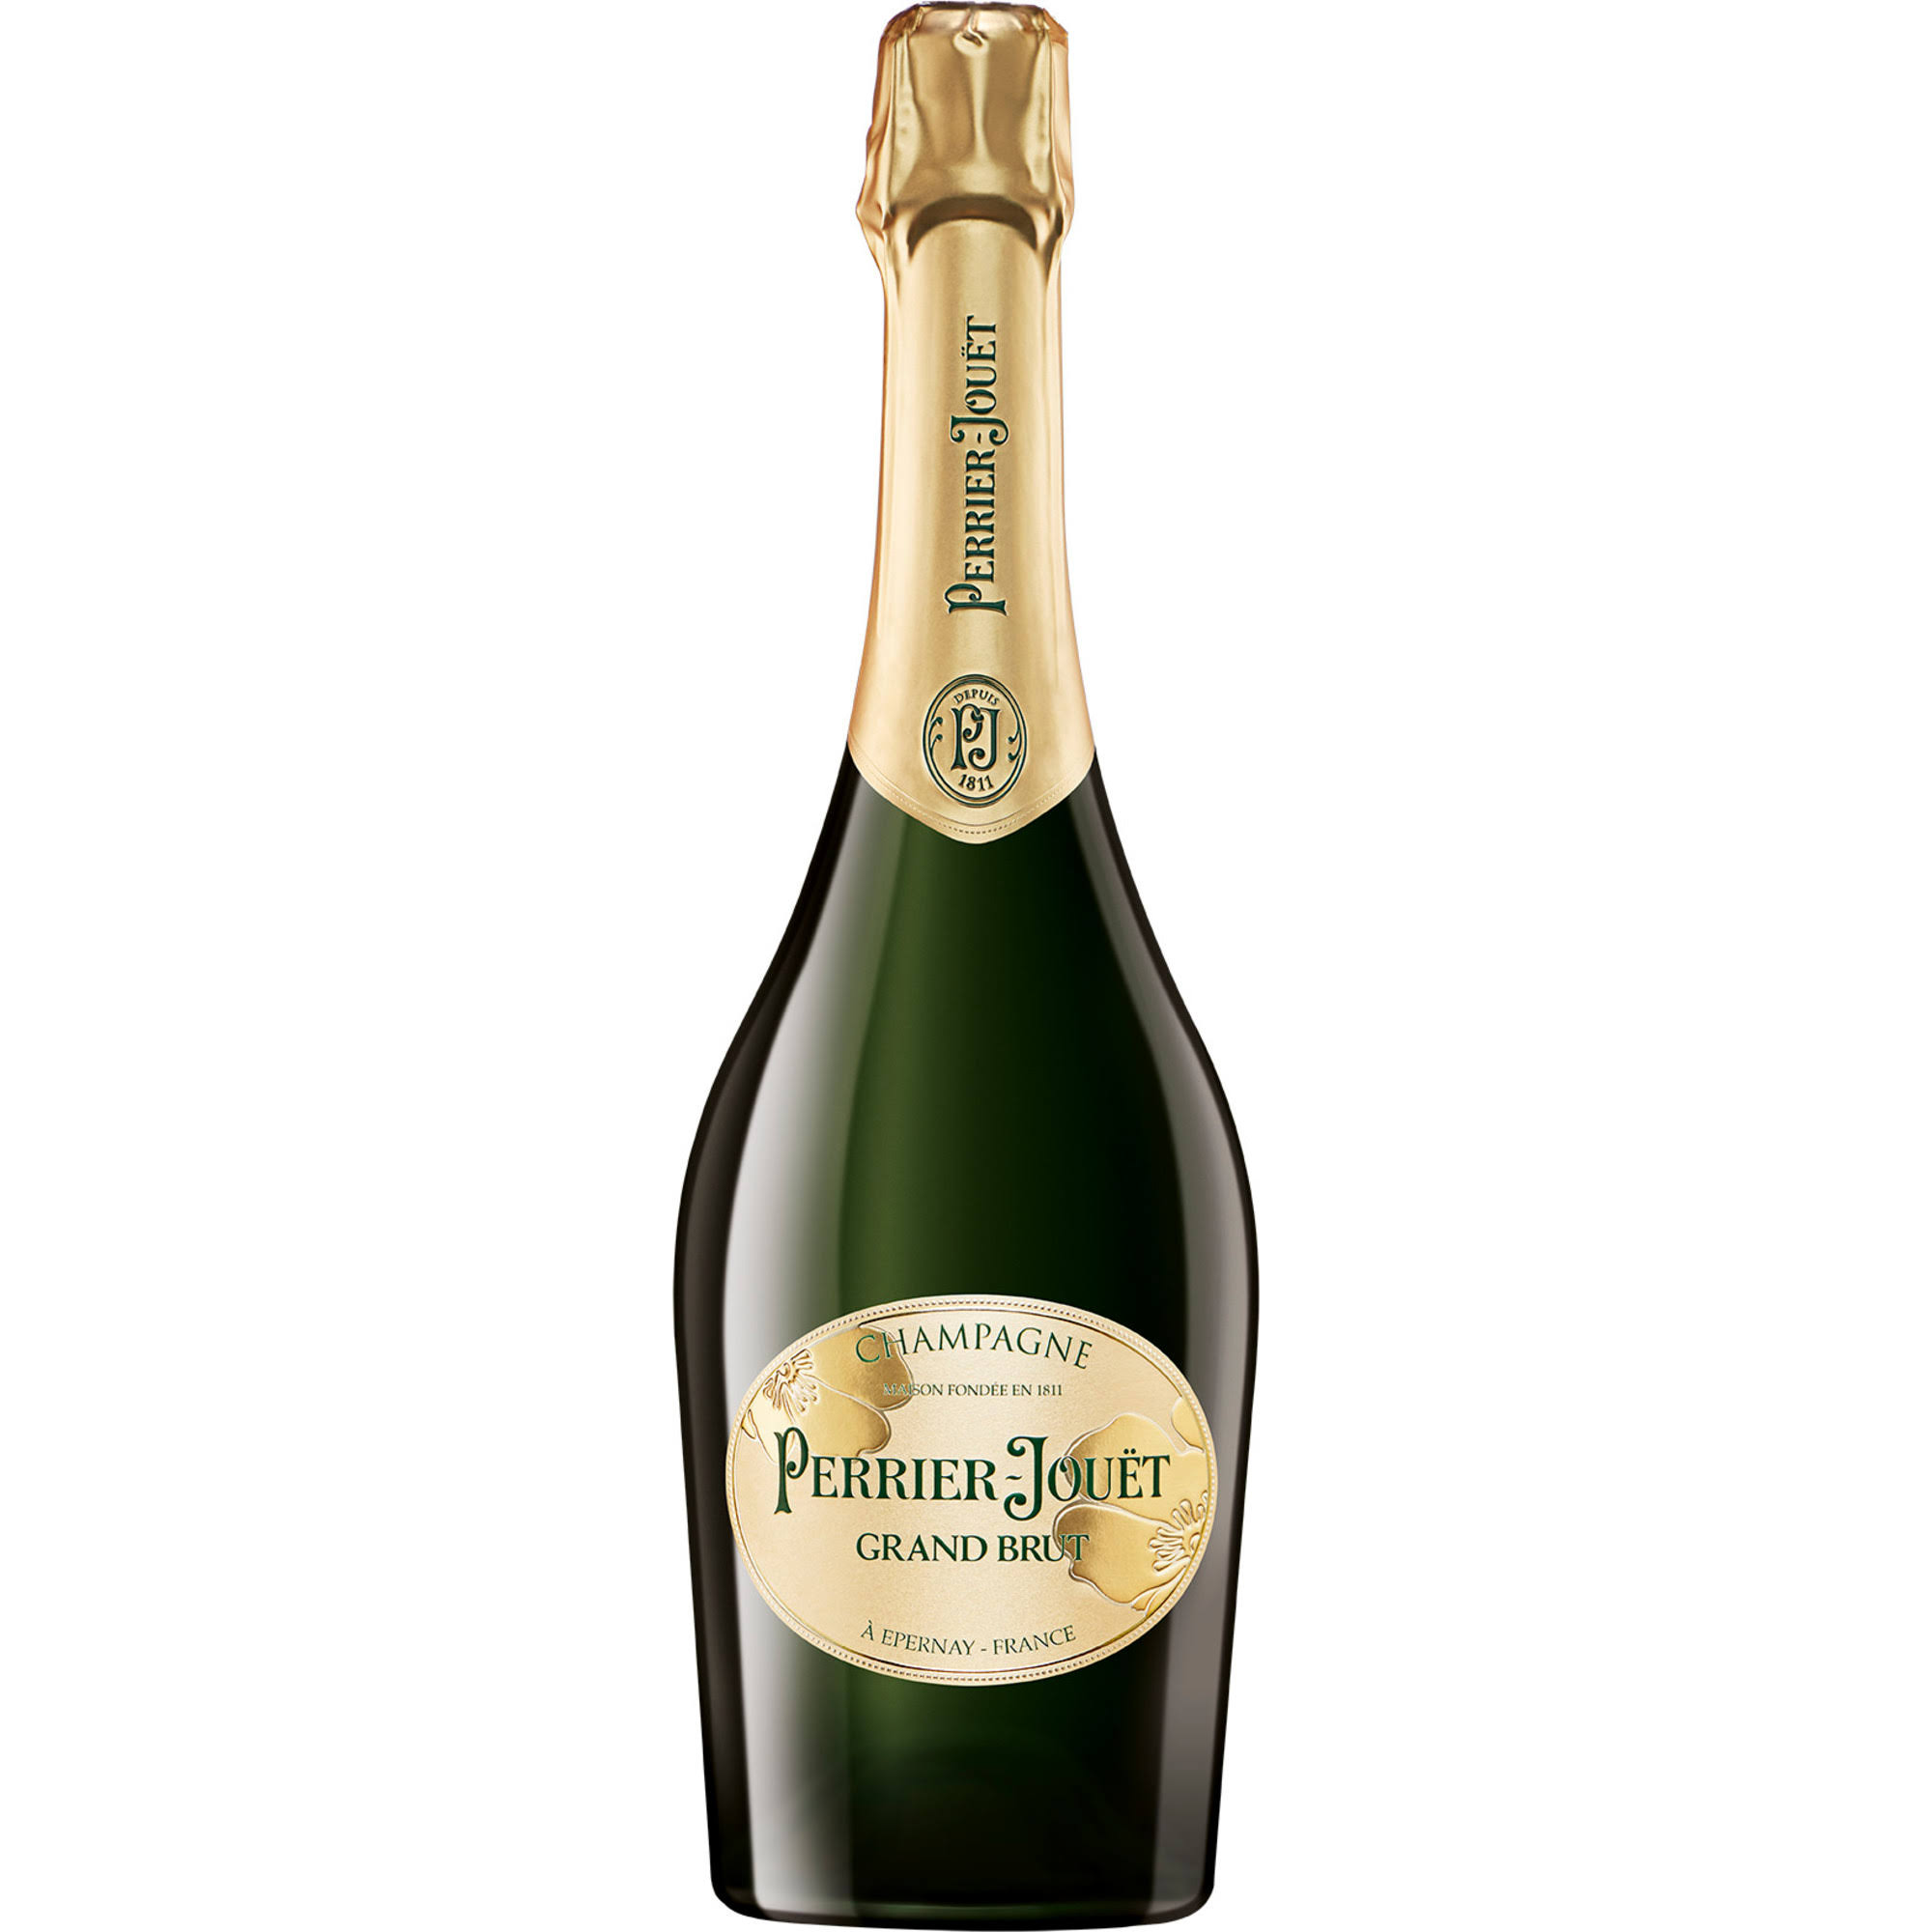 Perrier Jouet Champagne, Grand Brut, Epernay France - 750 ml